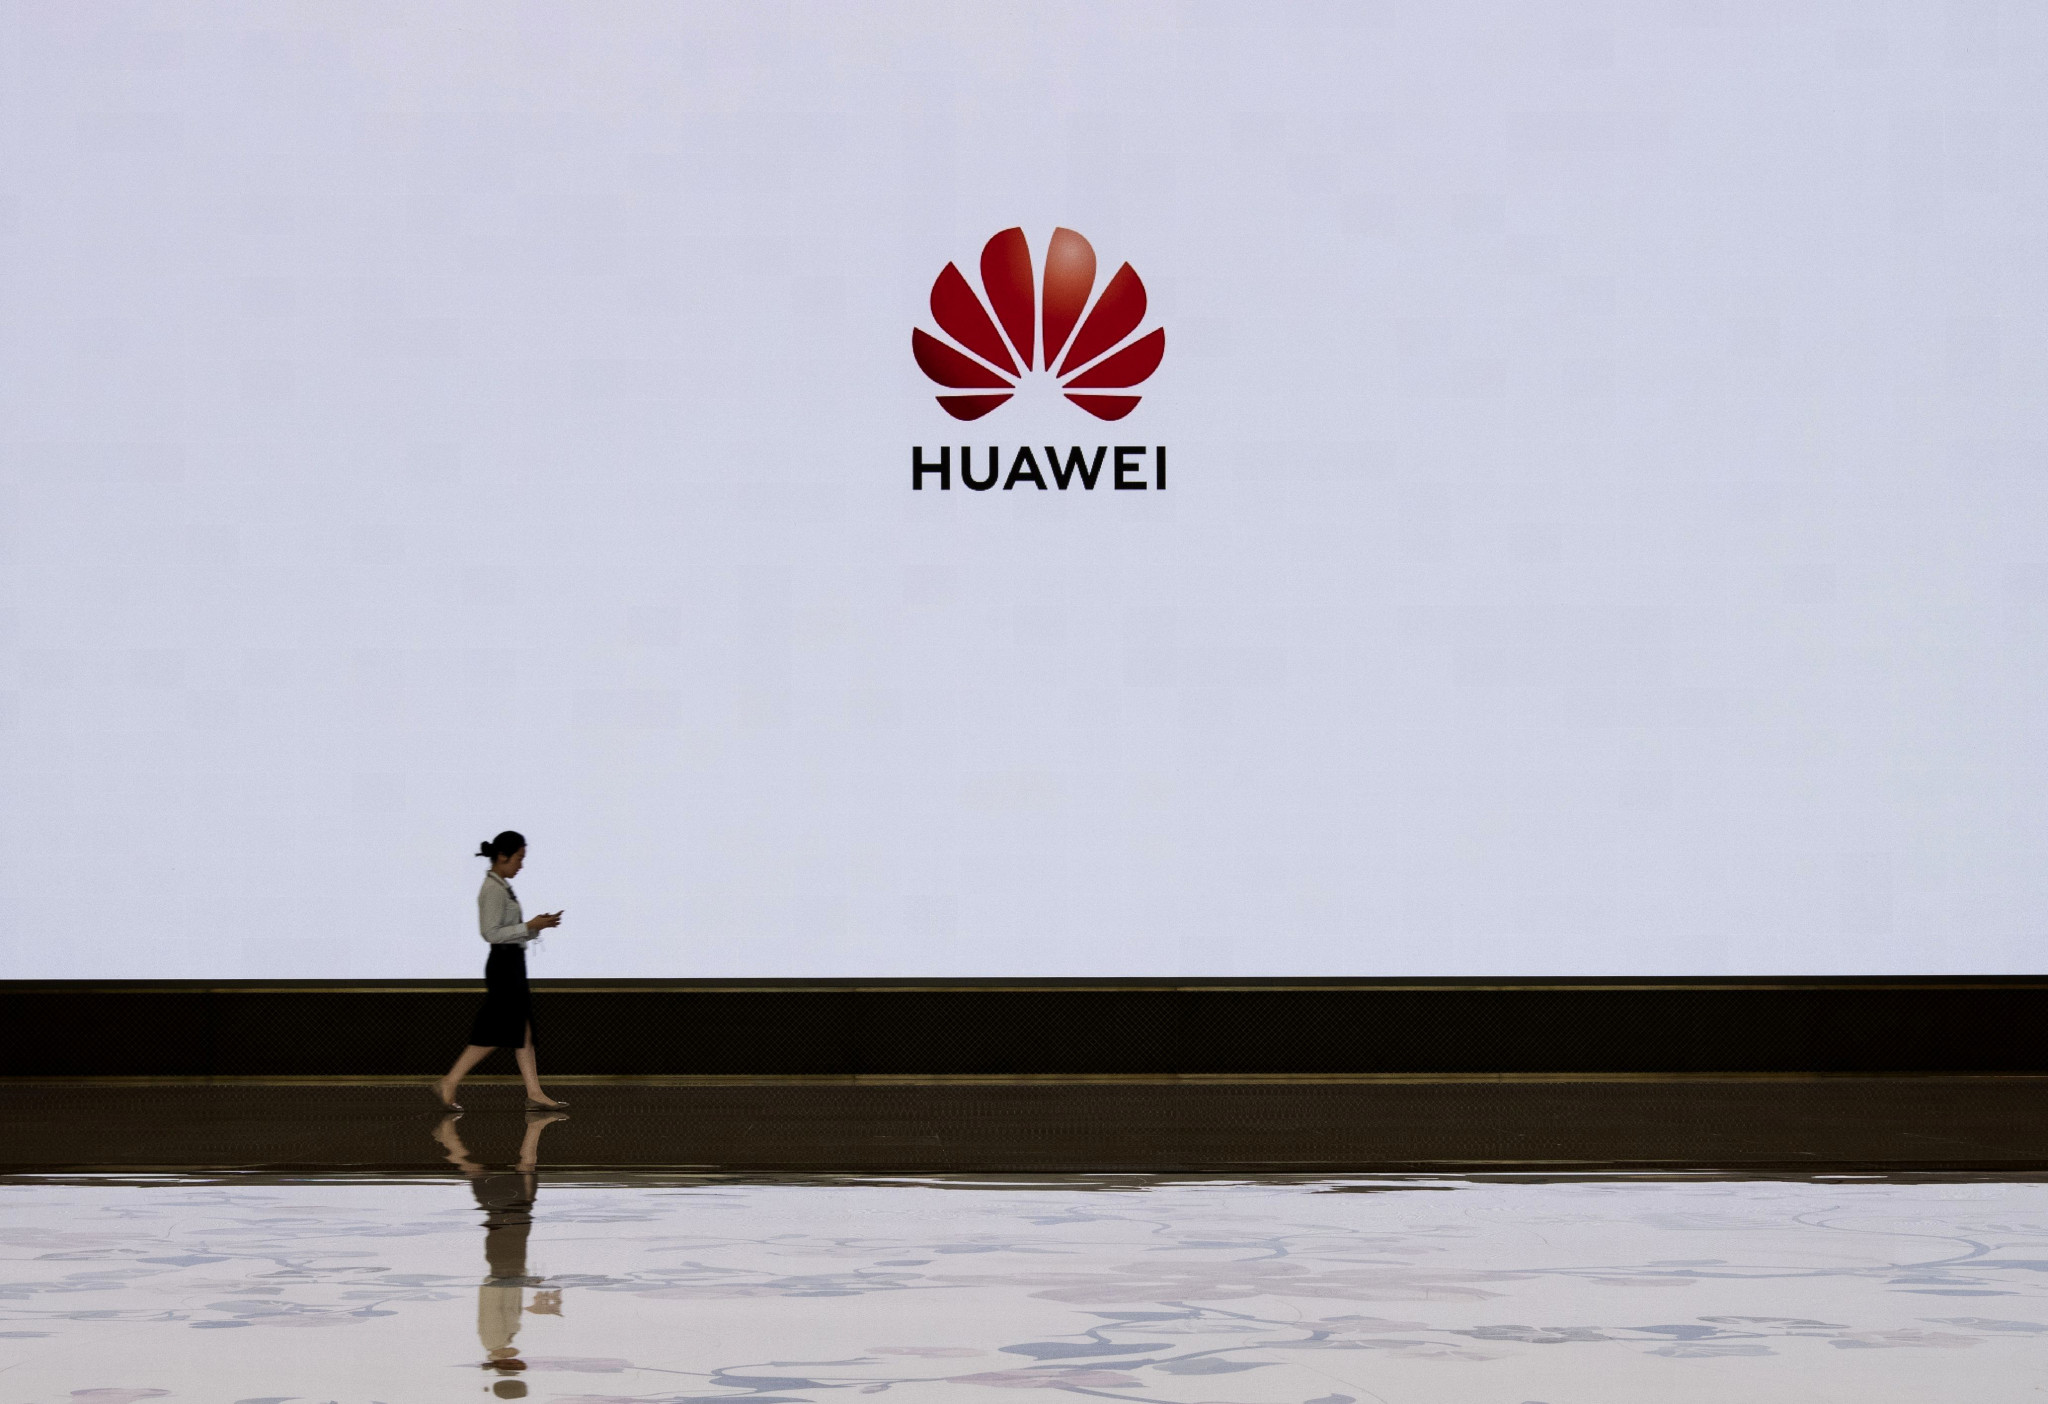 Restrictions placed on Chinese company Huawei have seen others benefit, such as Olympic sponsor Samsung ©Getty Images